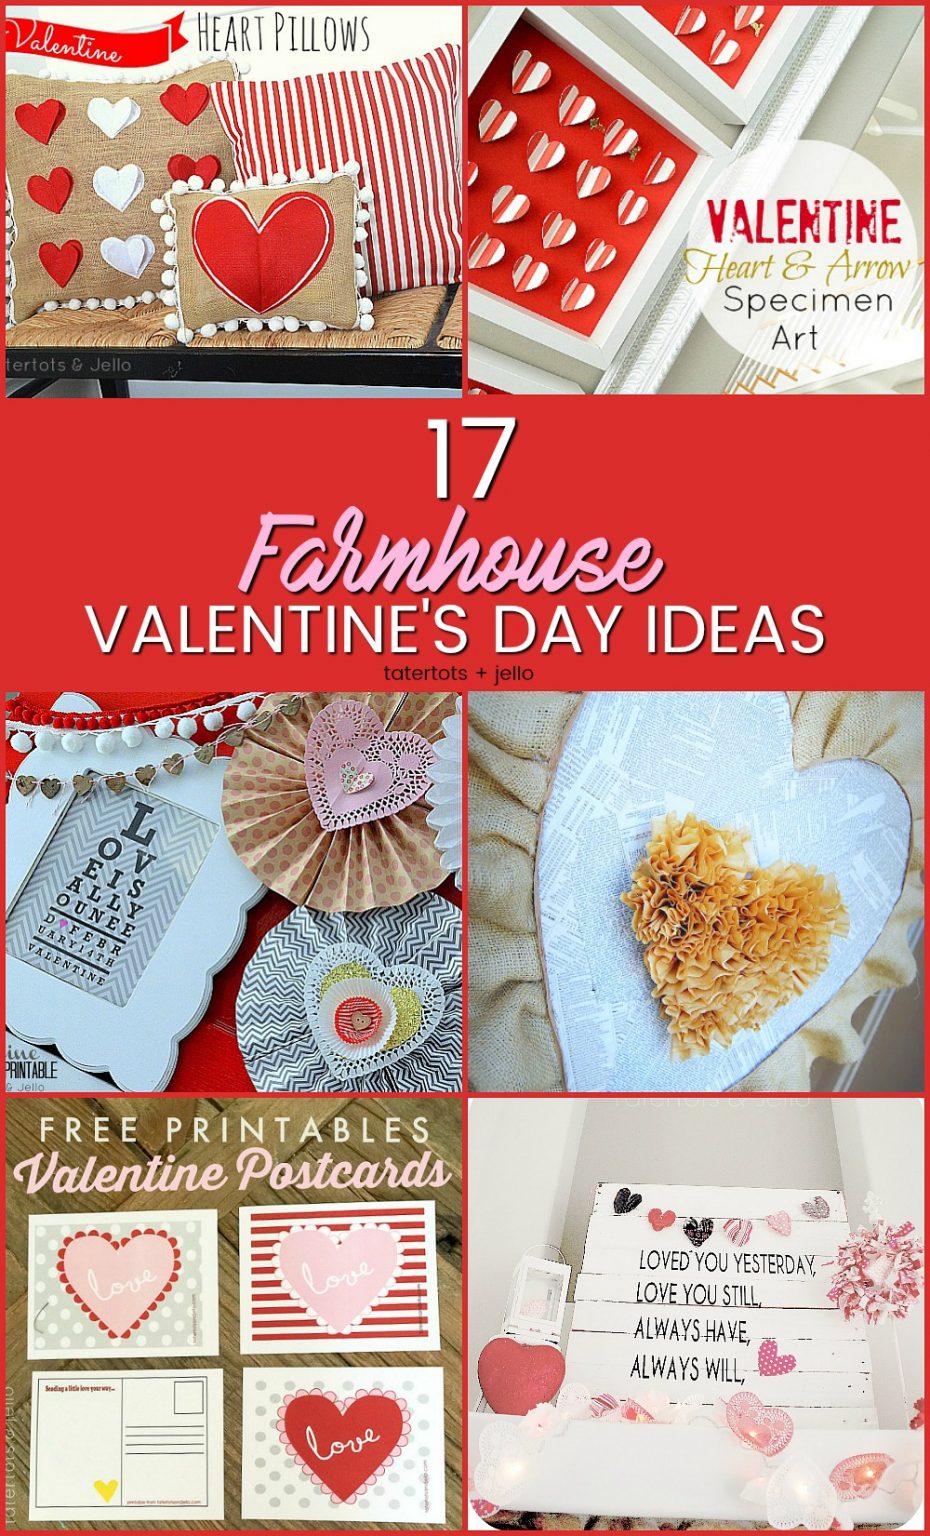 Printable Valentines Day Images Farmhouse